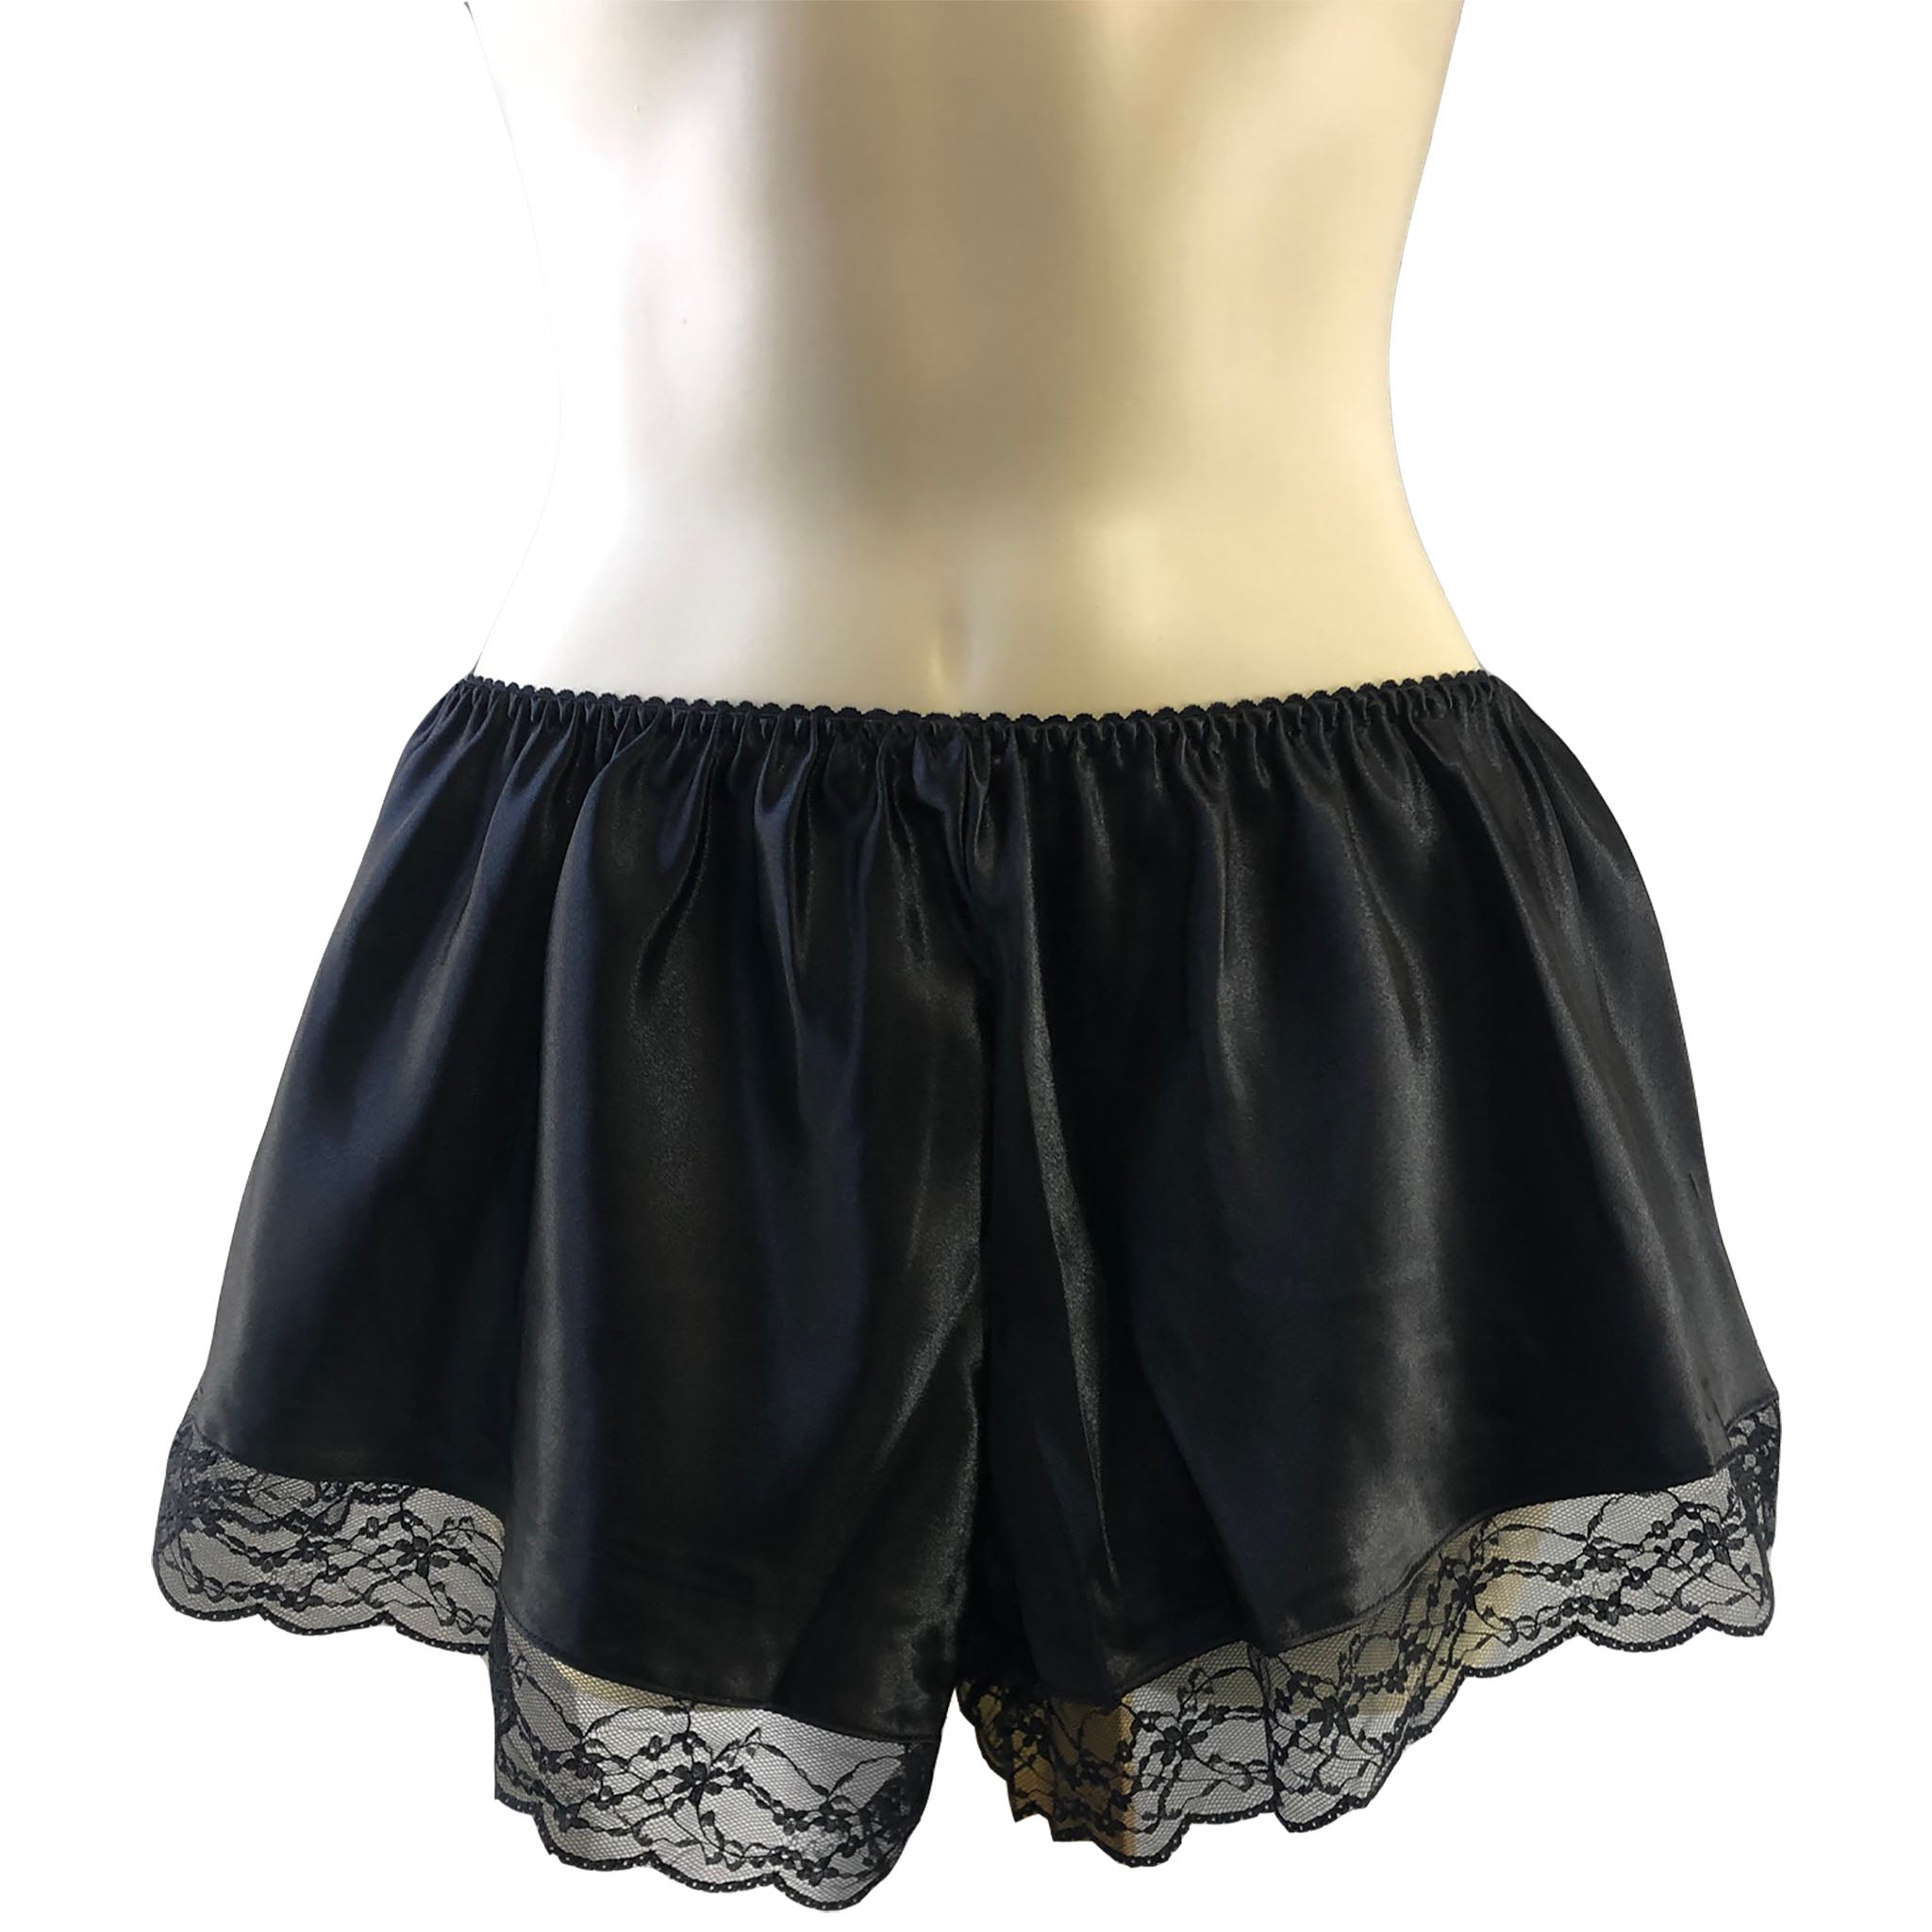 Black Sexy Satin Lace French Knickers Shorts Negligee Lingerie